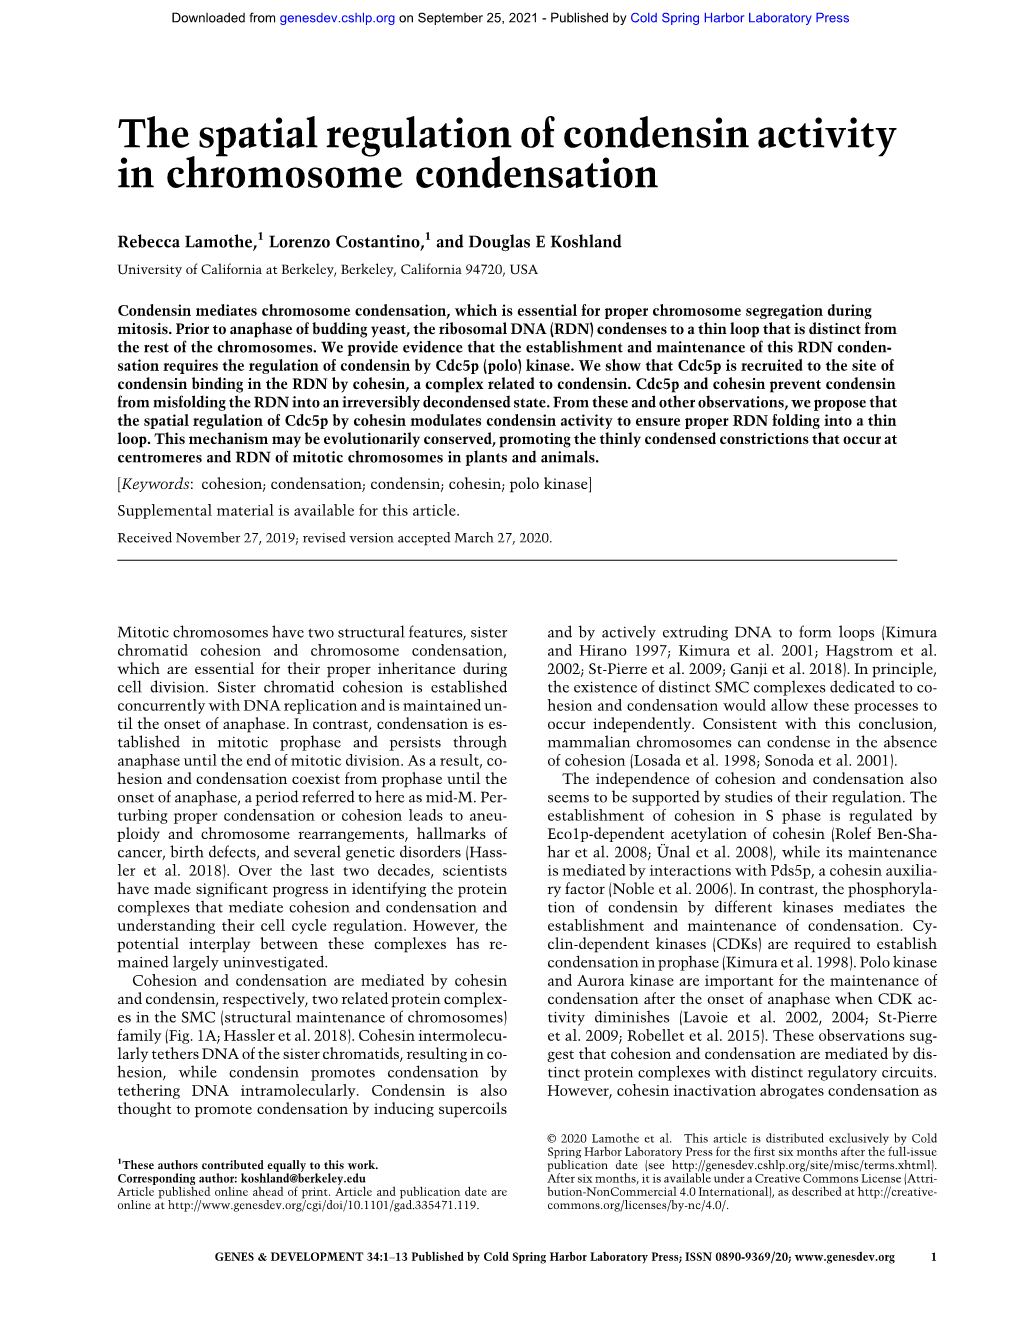 The Spatial Regulation of Condensin Activity in Chromosome Condensation